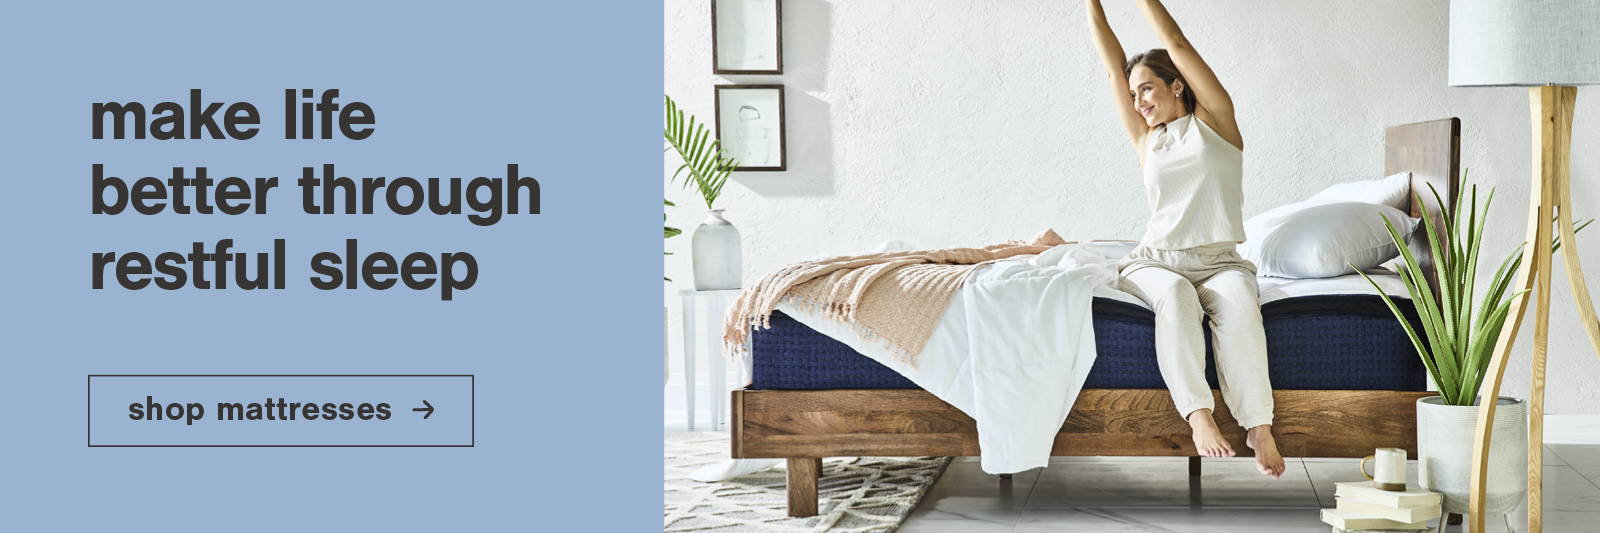 Make life better through restful sleep - Shop mattresses - brown, wood bed with woman stretching 